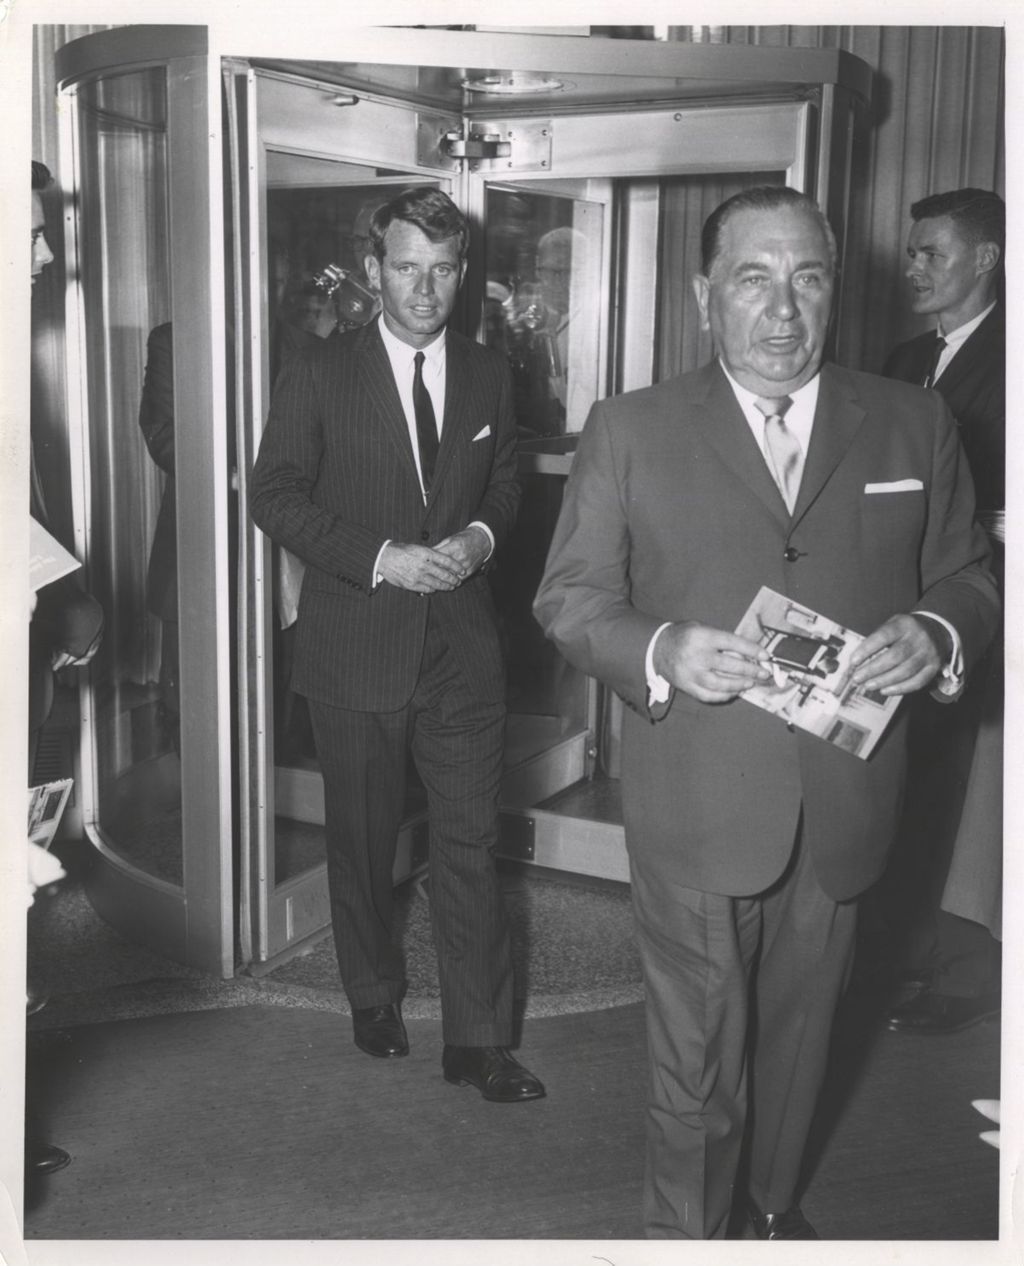 Miniature of Robert F. Kennedy with Richard J. Daley